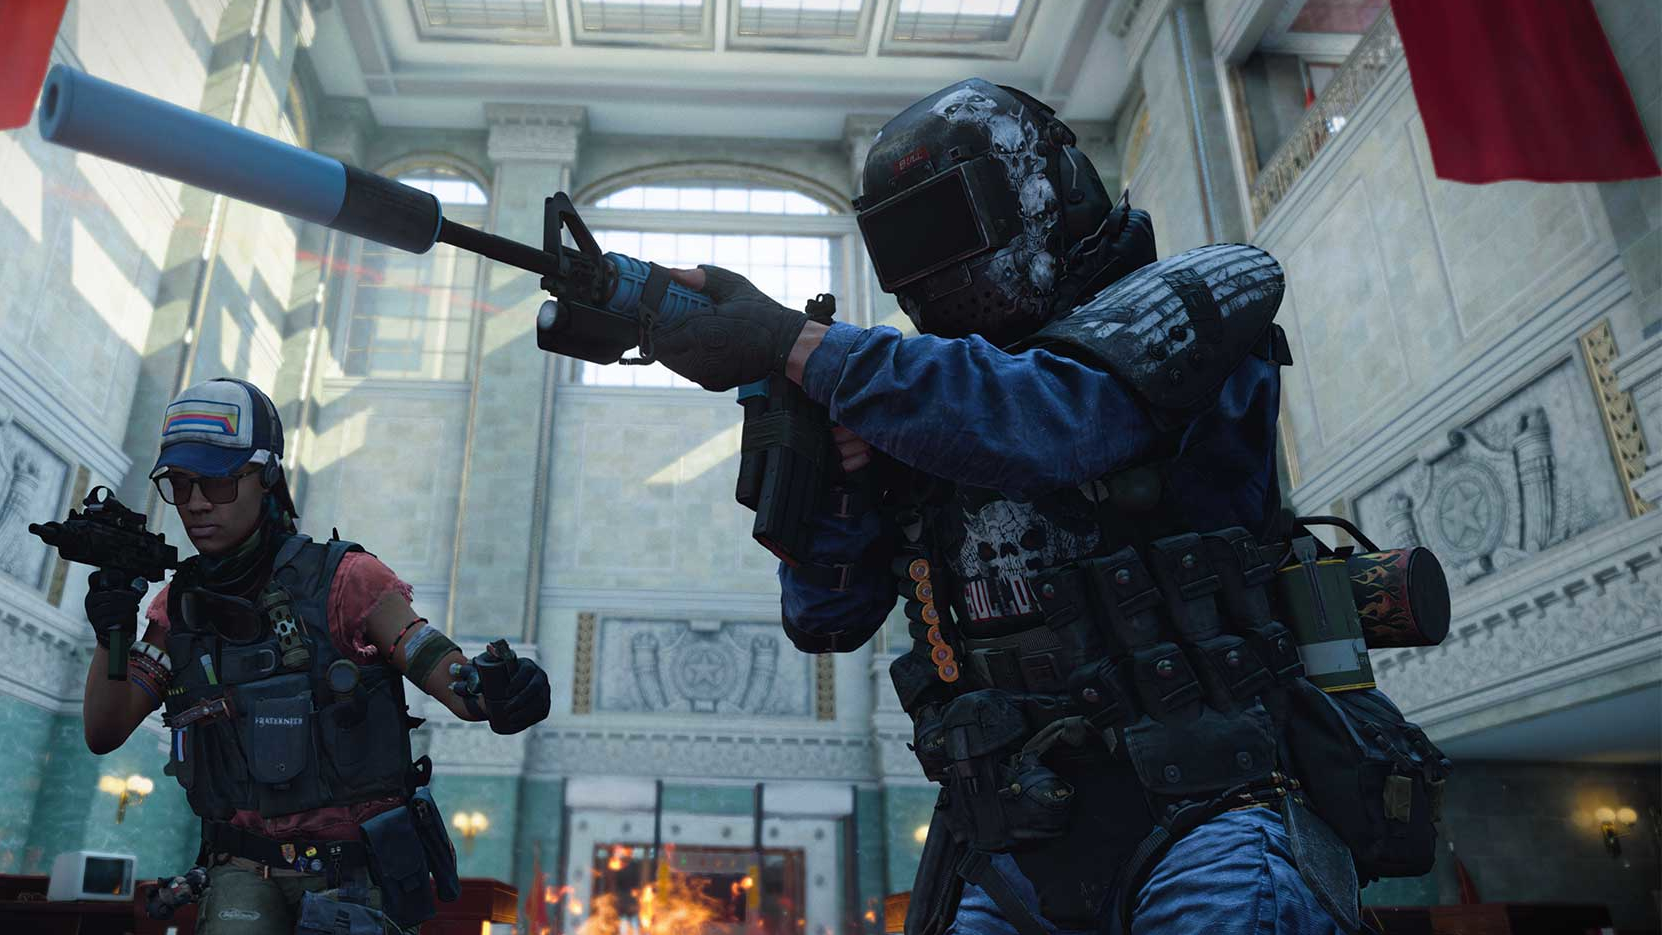  Call of Duty: Warzone drops a second, stronger nerf on the dominant DMR 14 